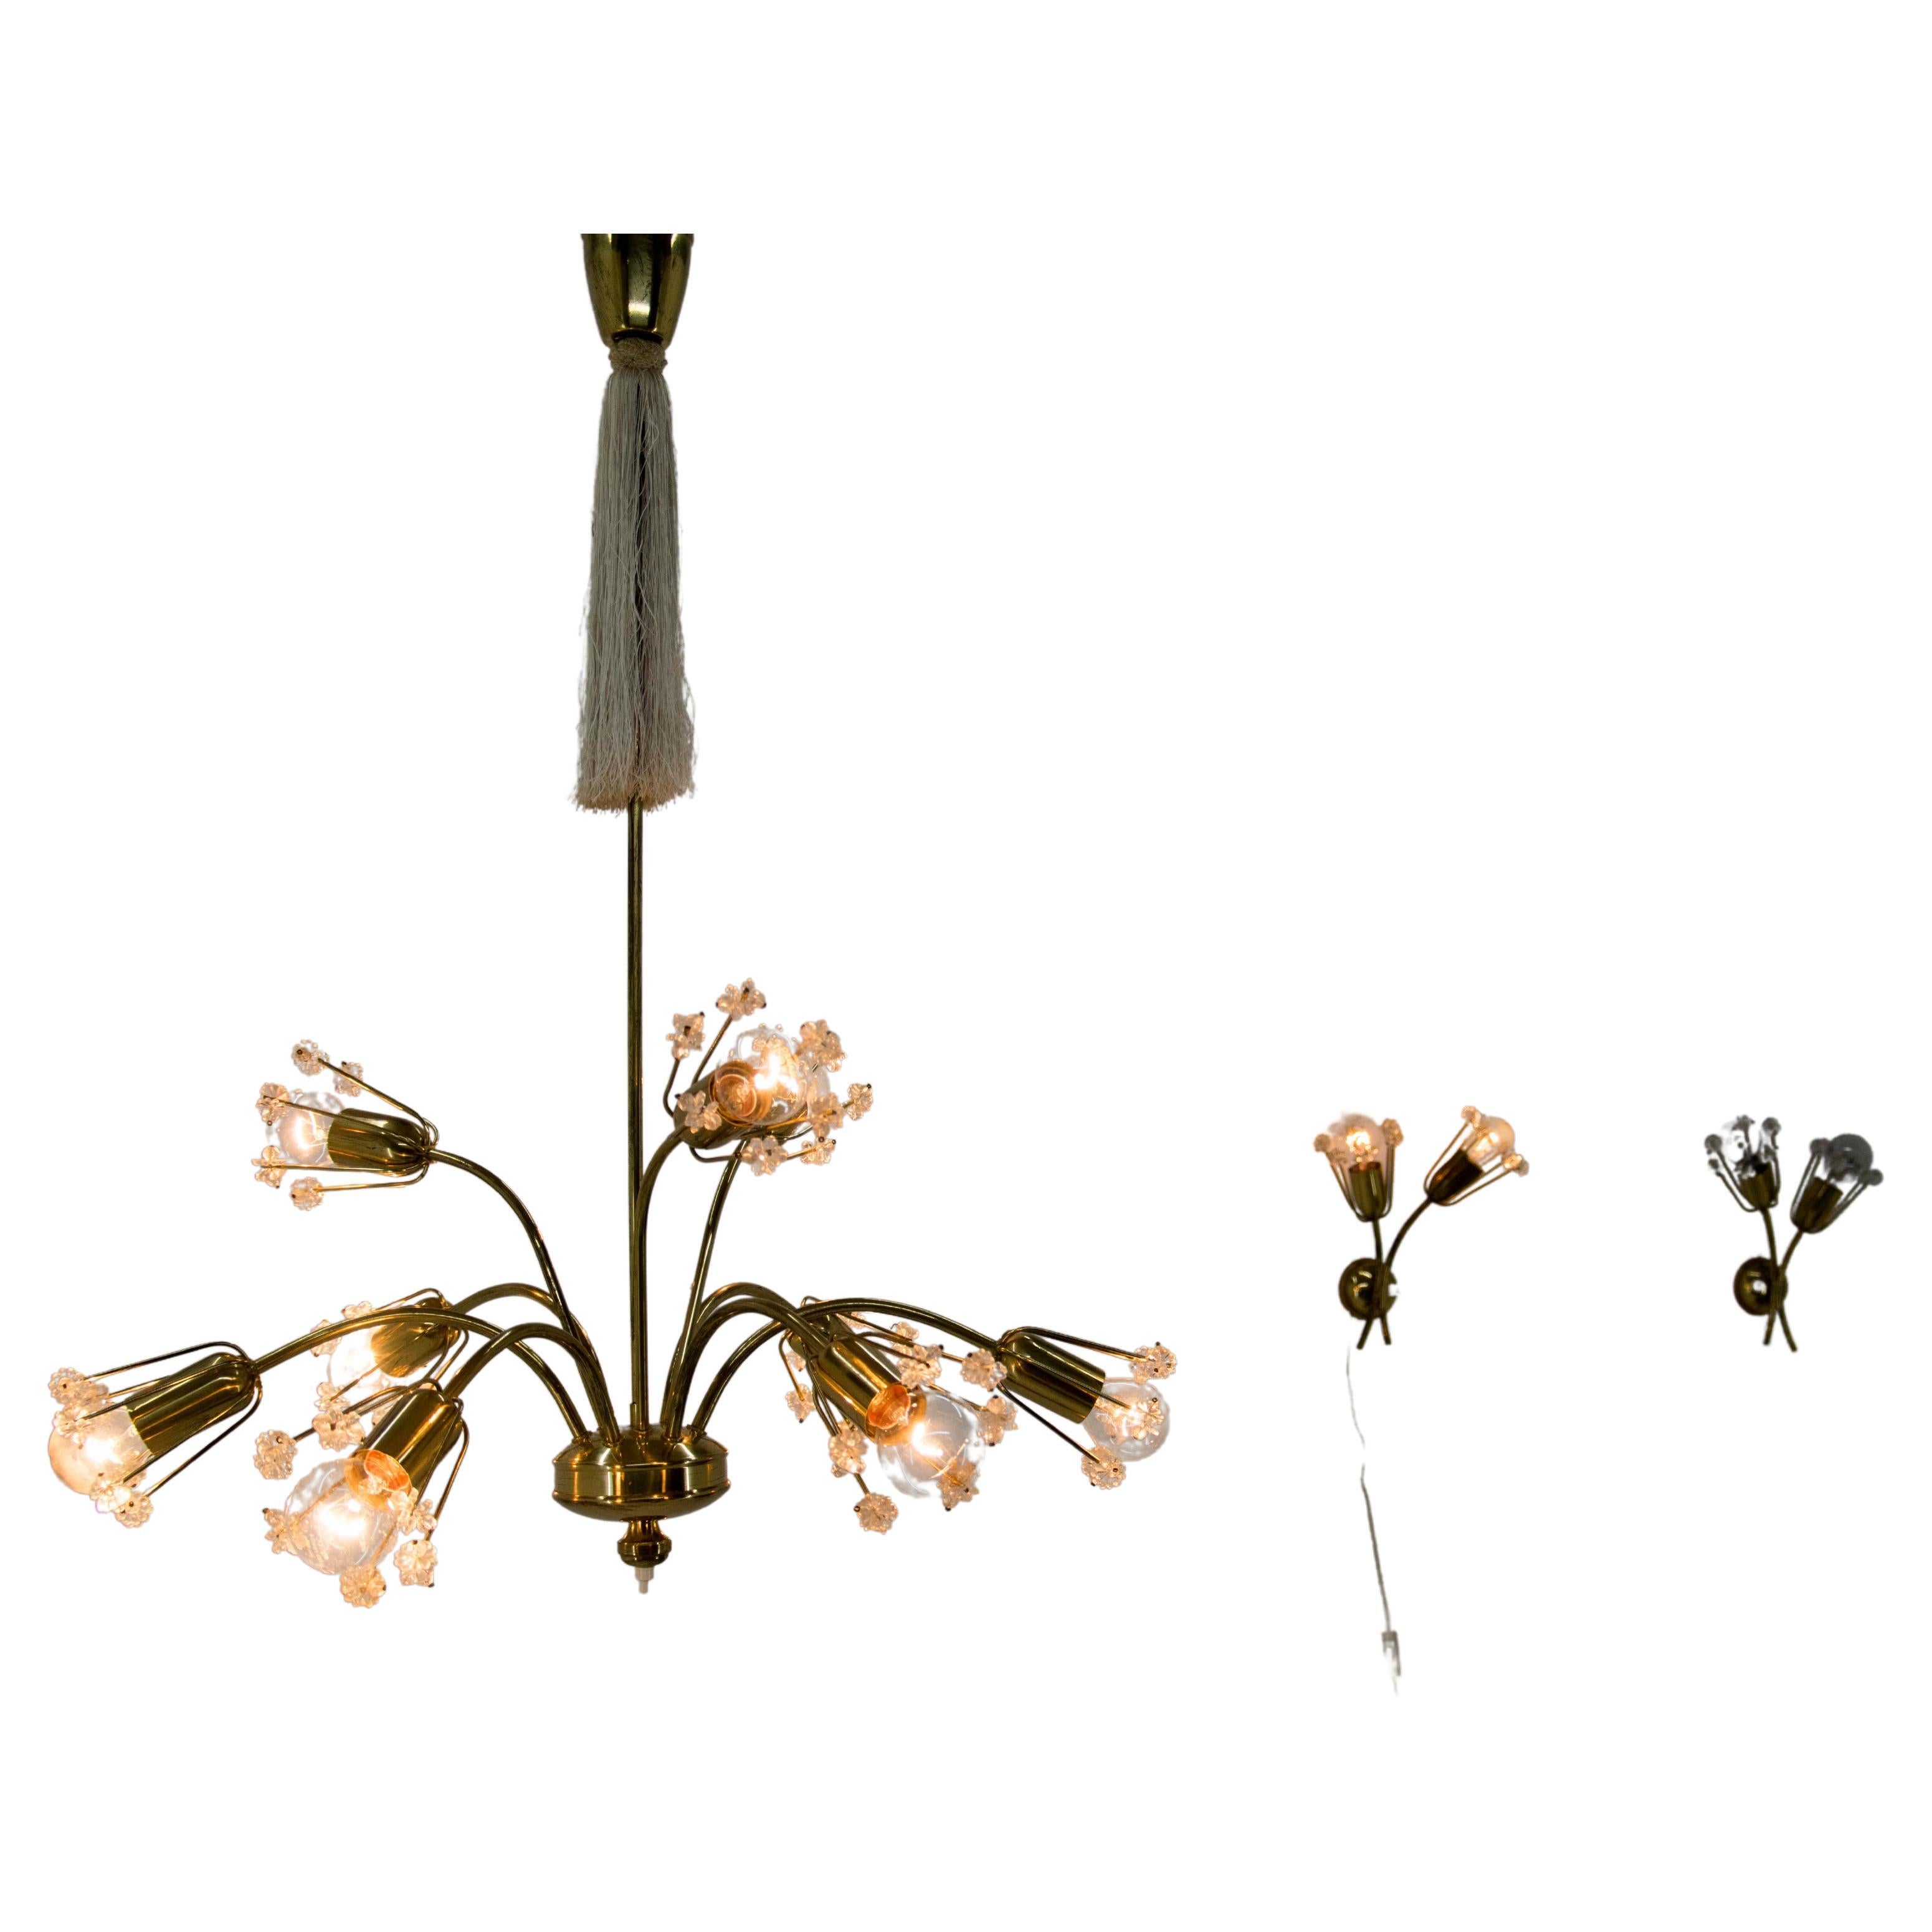 Set of Emil Stejnar Chandelier and Two Wall Lamps, Austria, 1950s For Sale